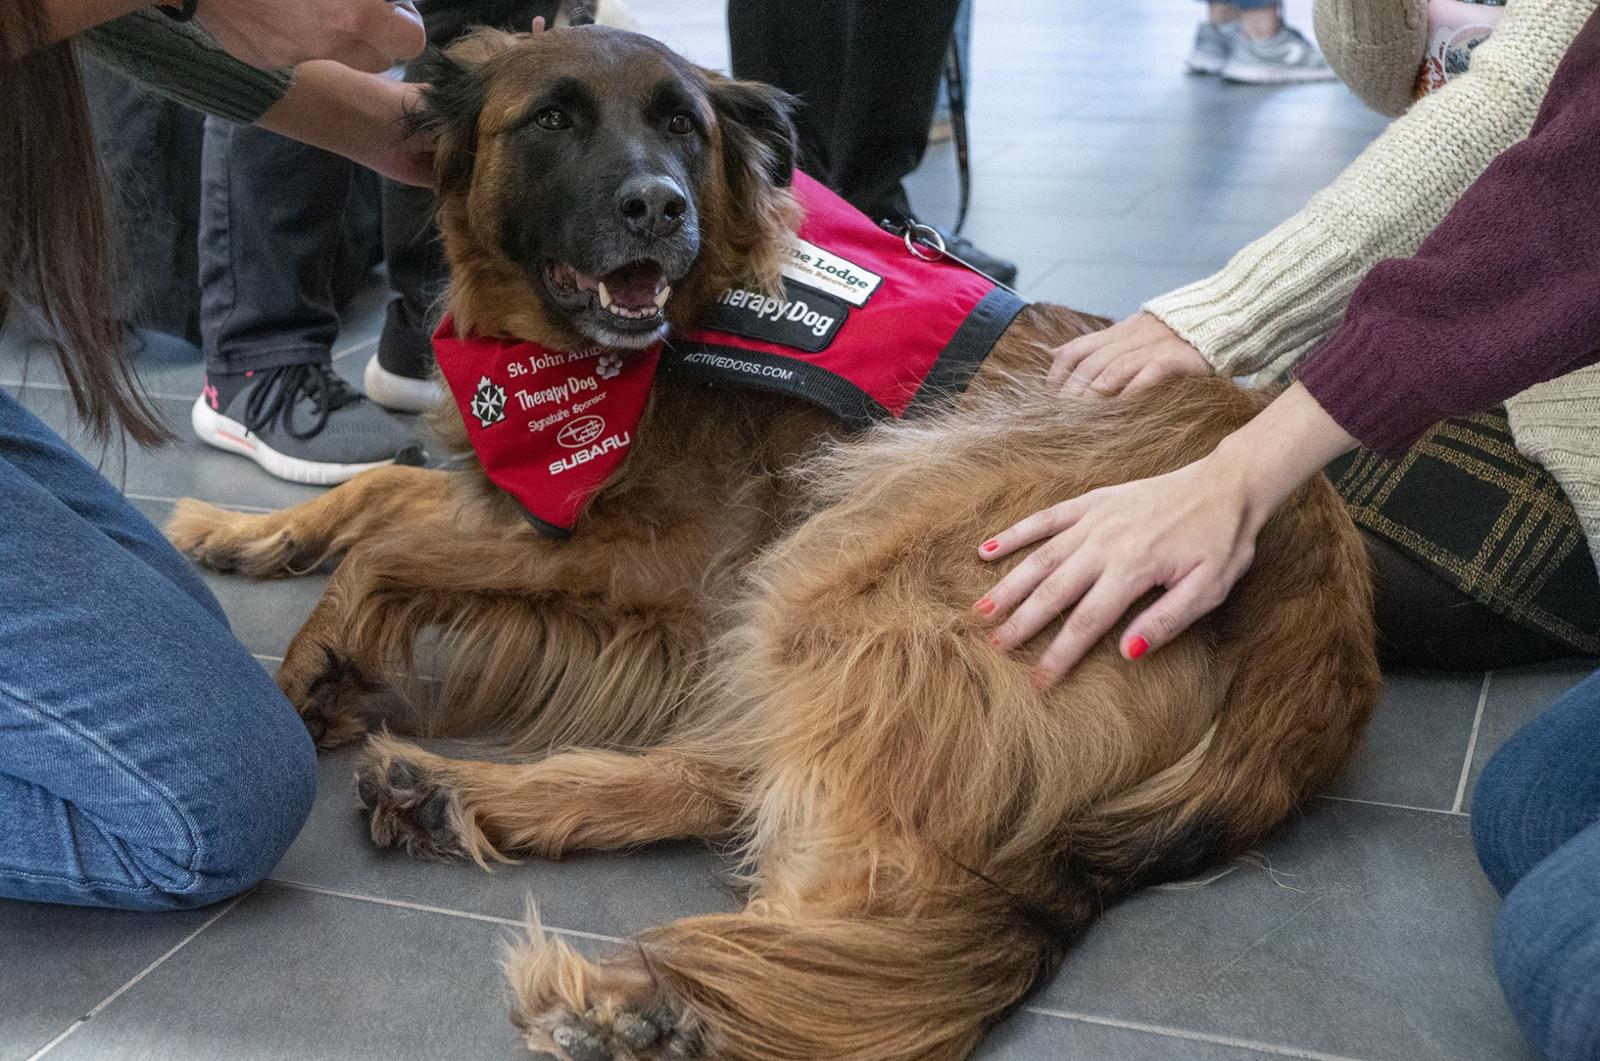 A therapy dog being pet by individuals.